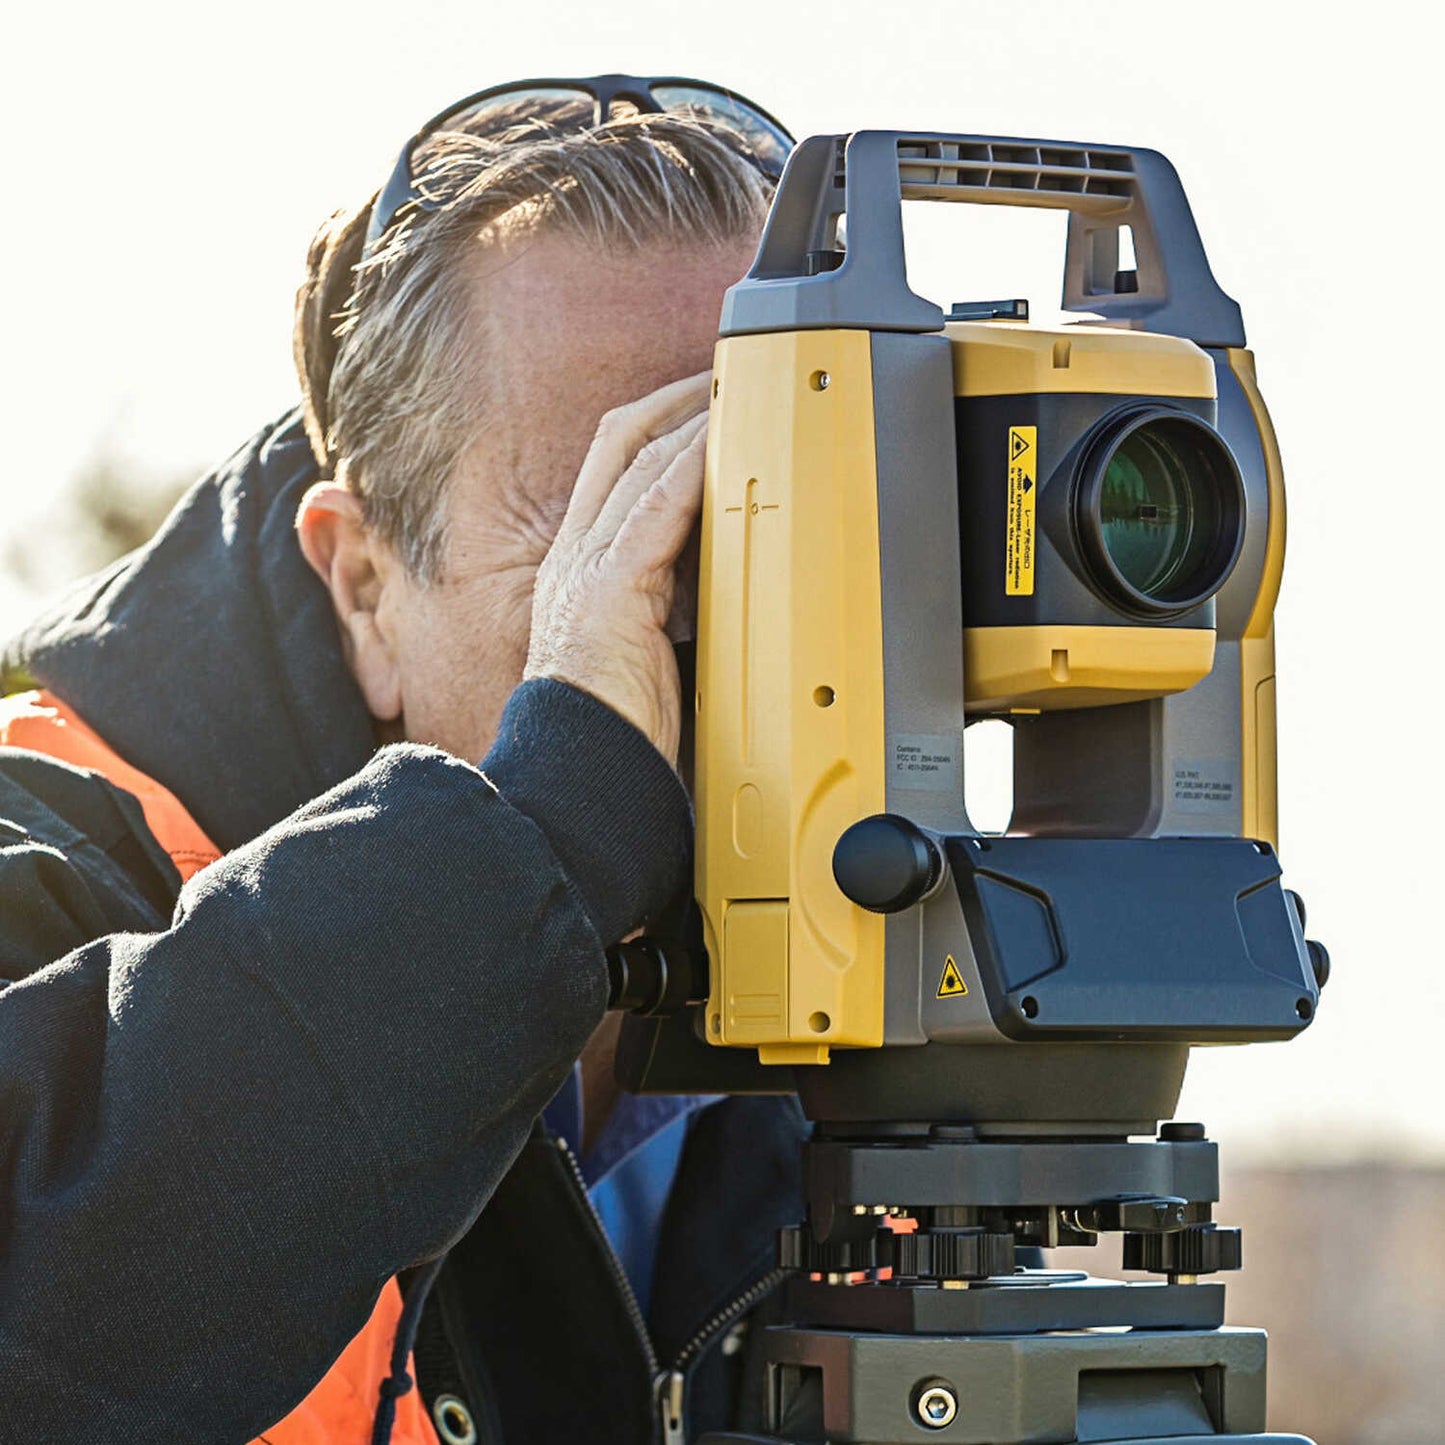 Topcon GM-55 5” Reflectorless Single Display Total Station with Bluetooth